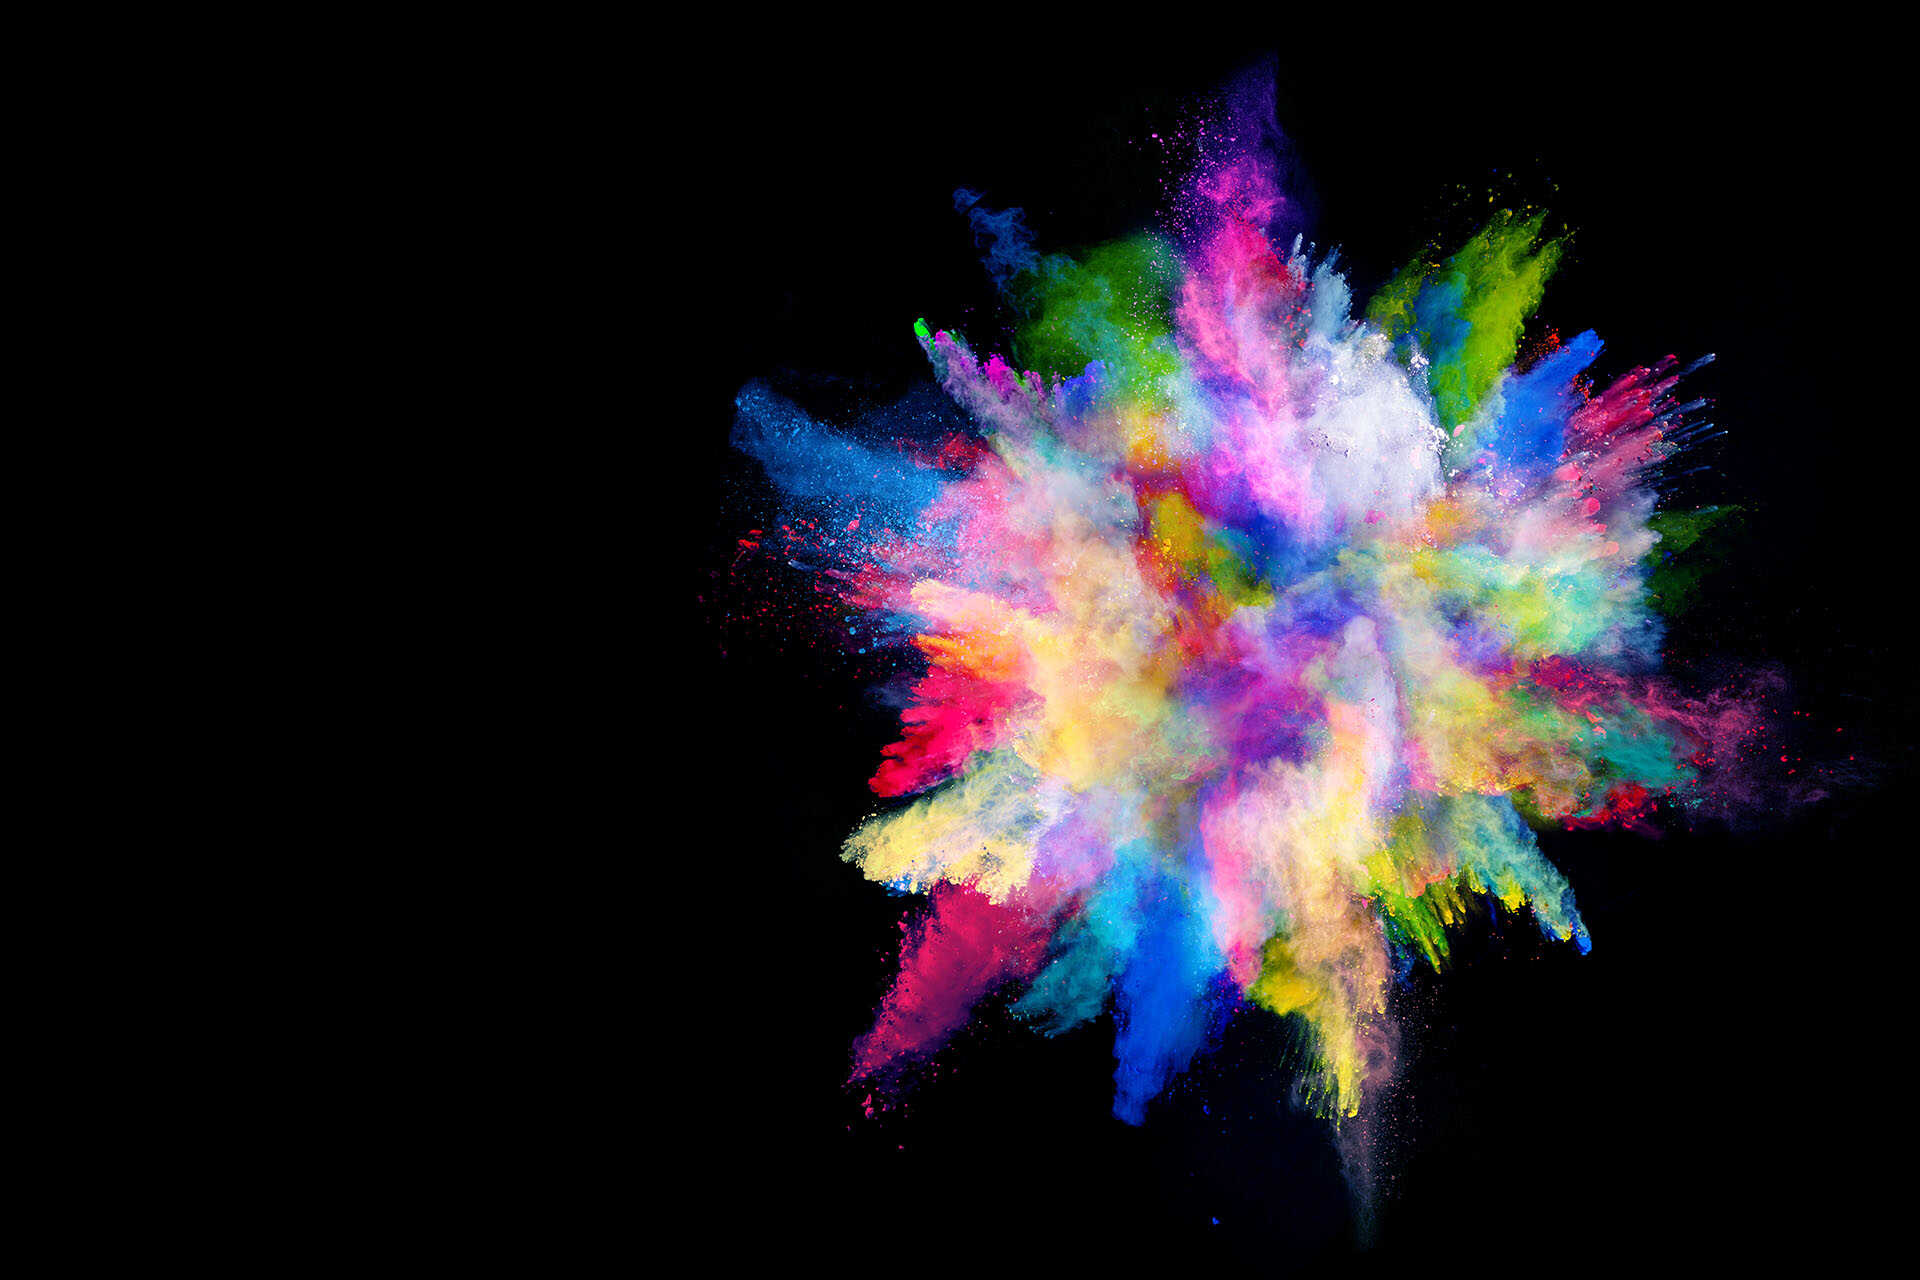 Paint explosion on a black background